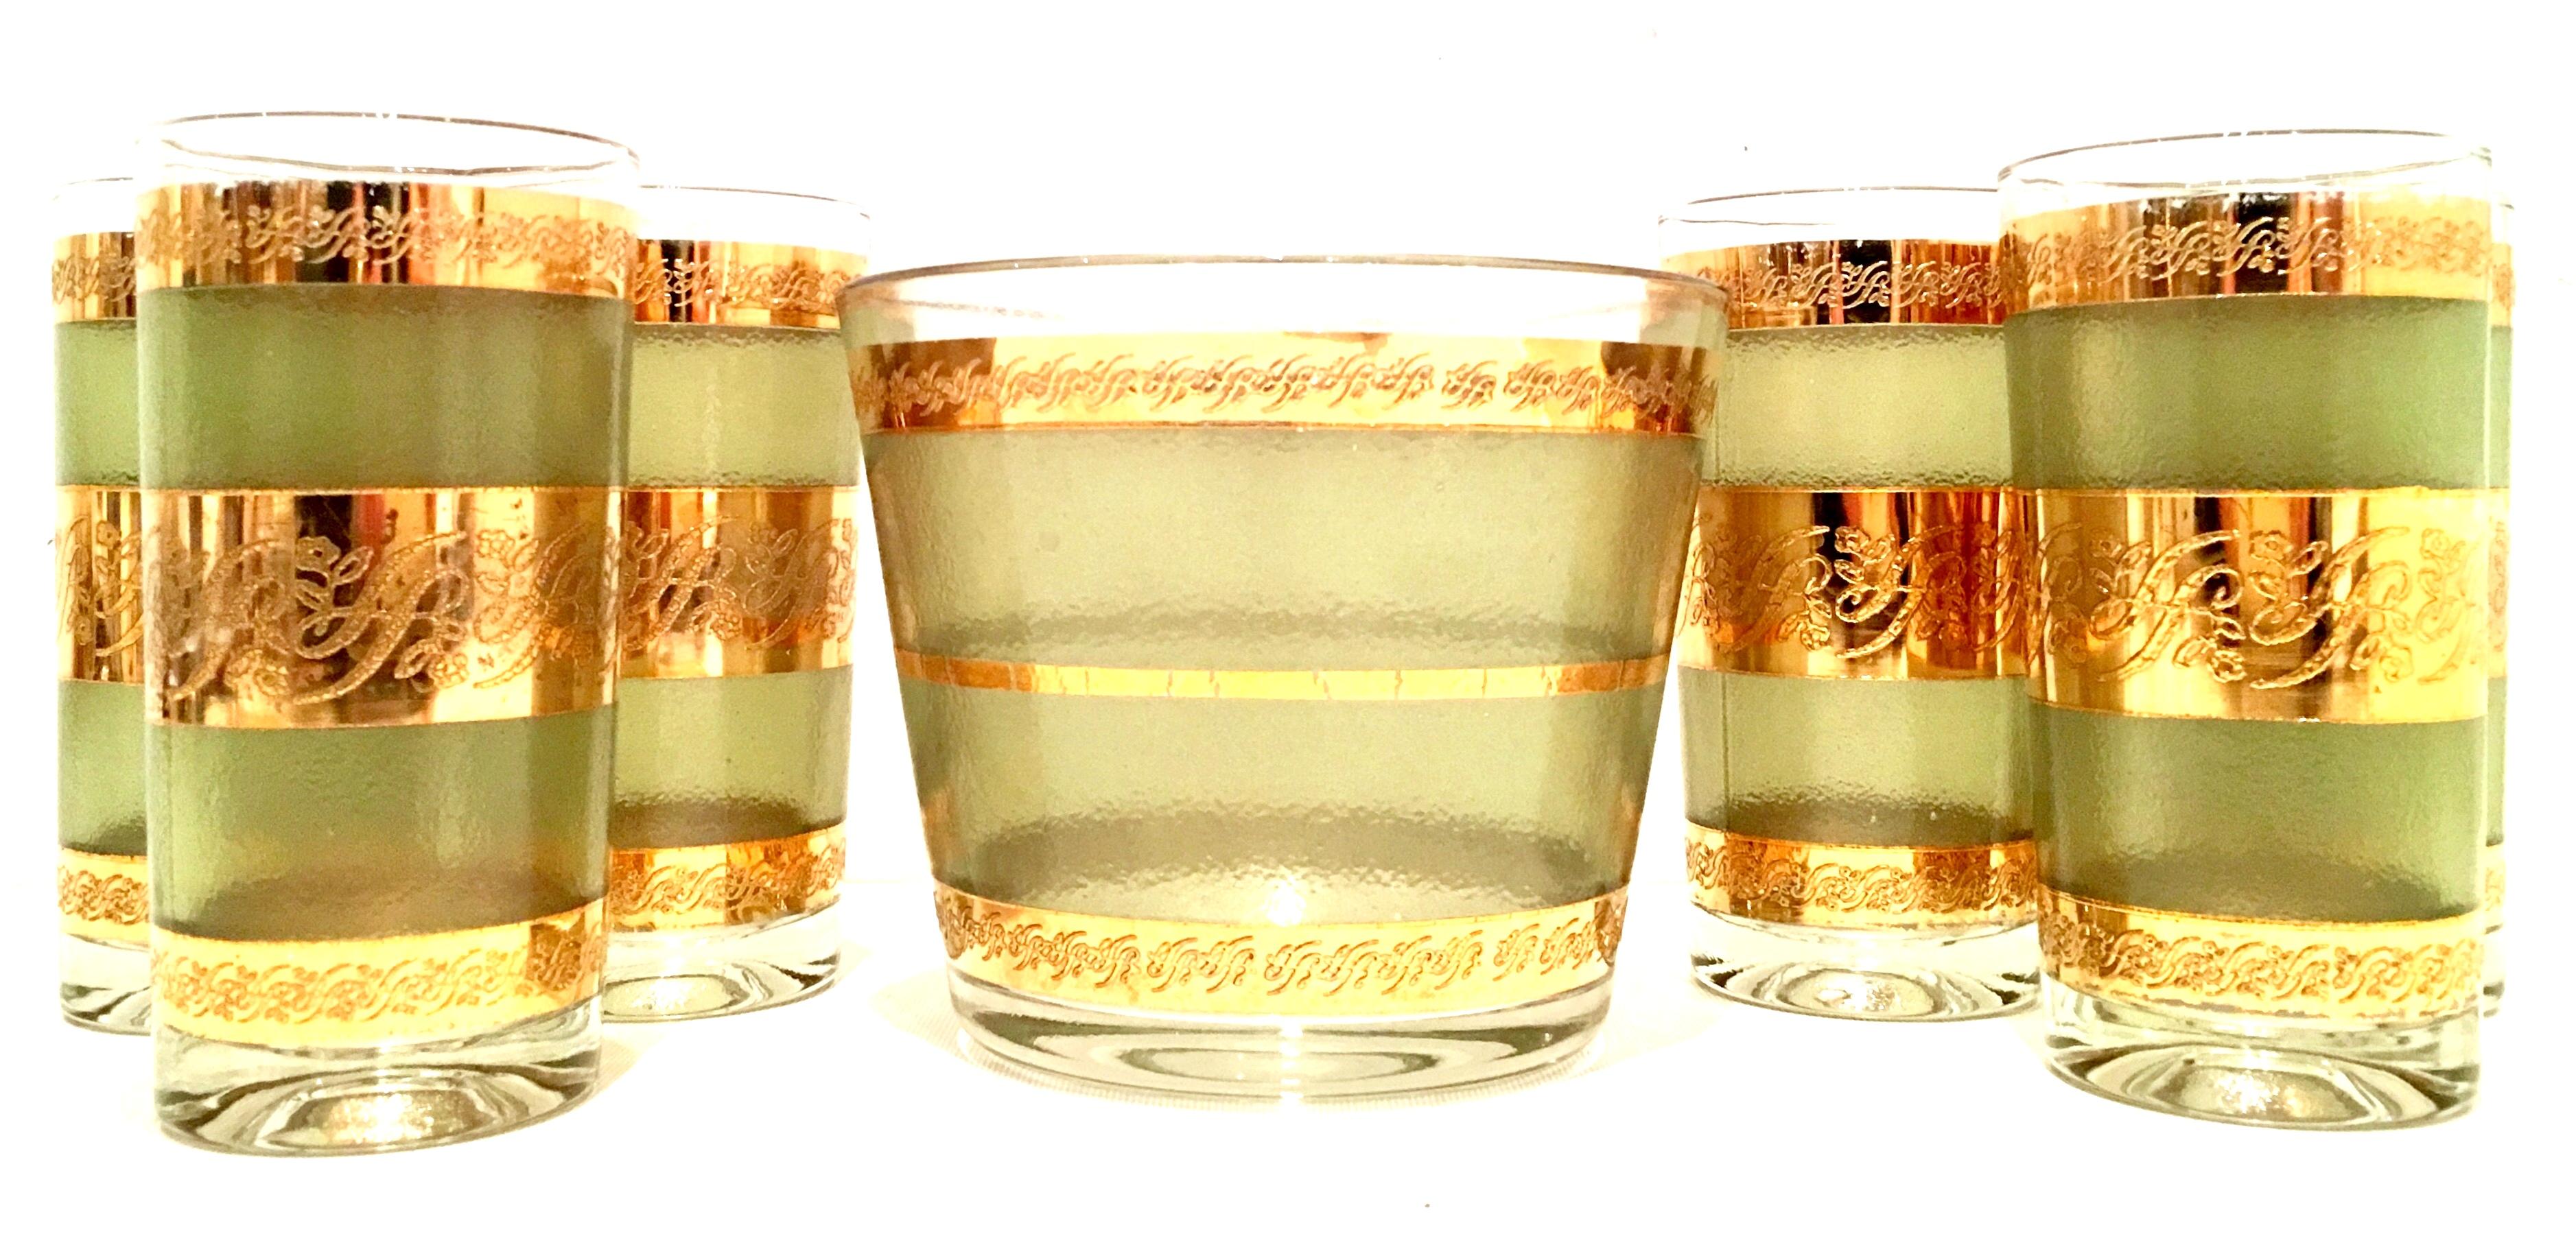 Mid-Century 22-karat gold band and textured green glass drinks set of seven pieces.
This drinks set features green textured glass with 22-karat gold scroll detail banding pattern.
Set includes, one ice bucket and six high ball glasses. 
High ball